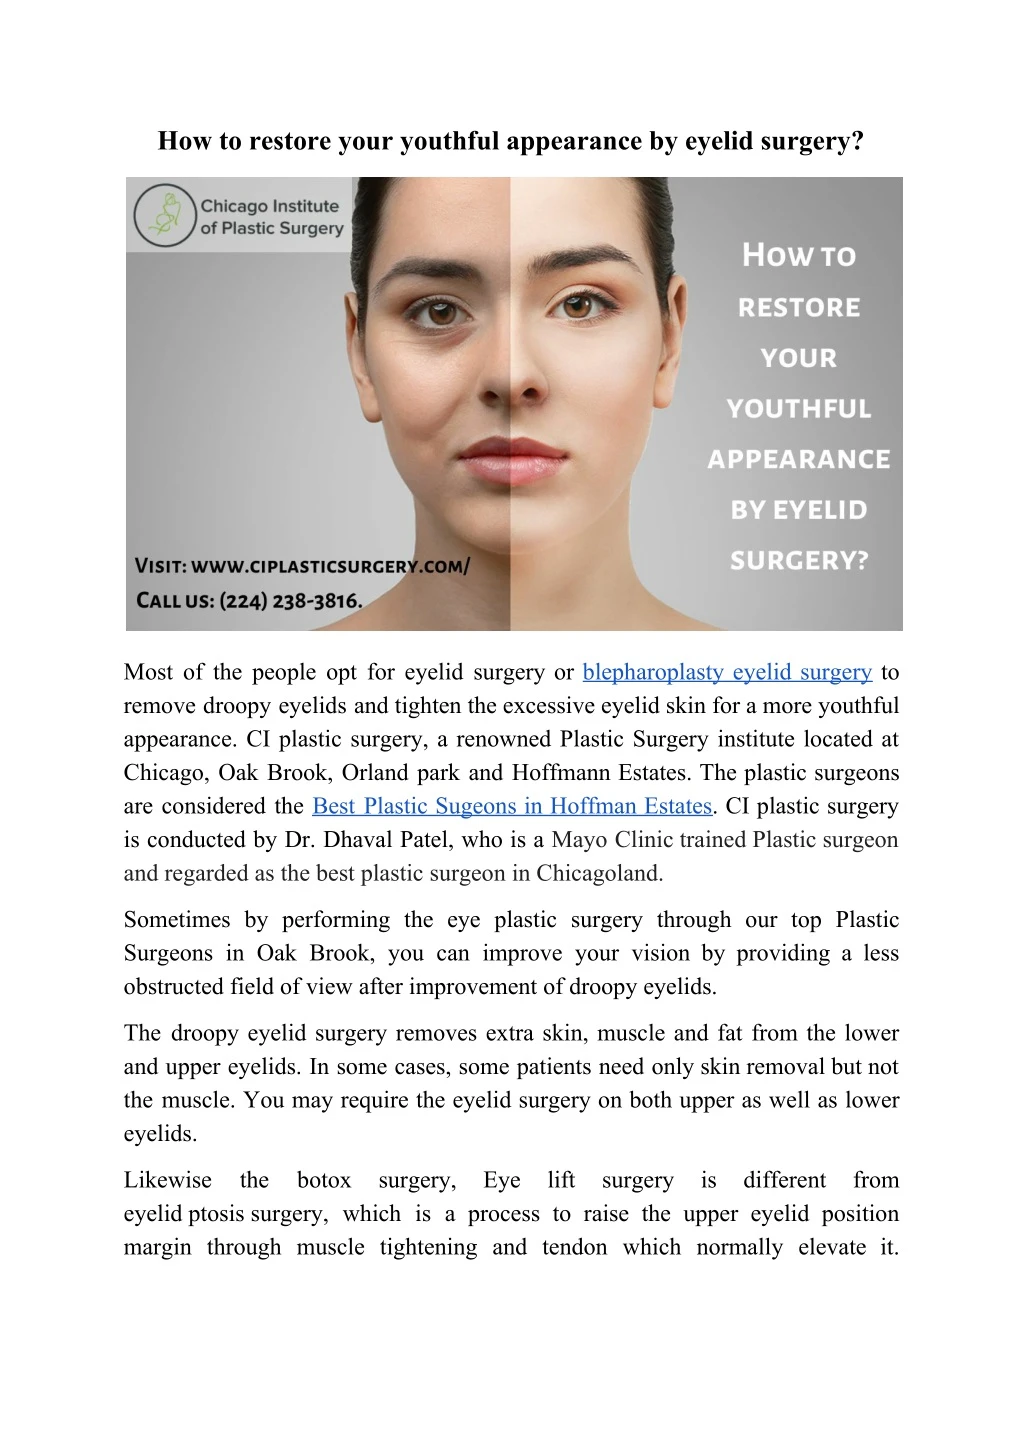 how to restore your youthful appearance by eyelid